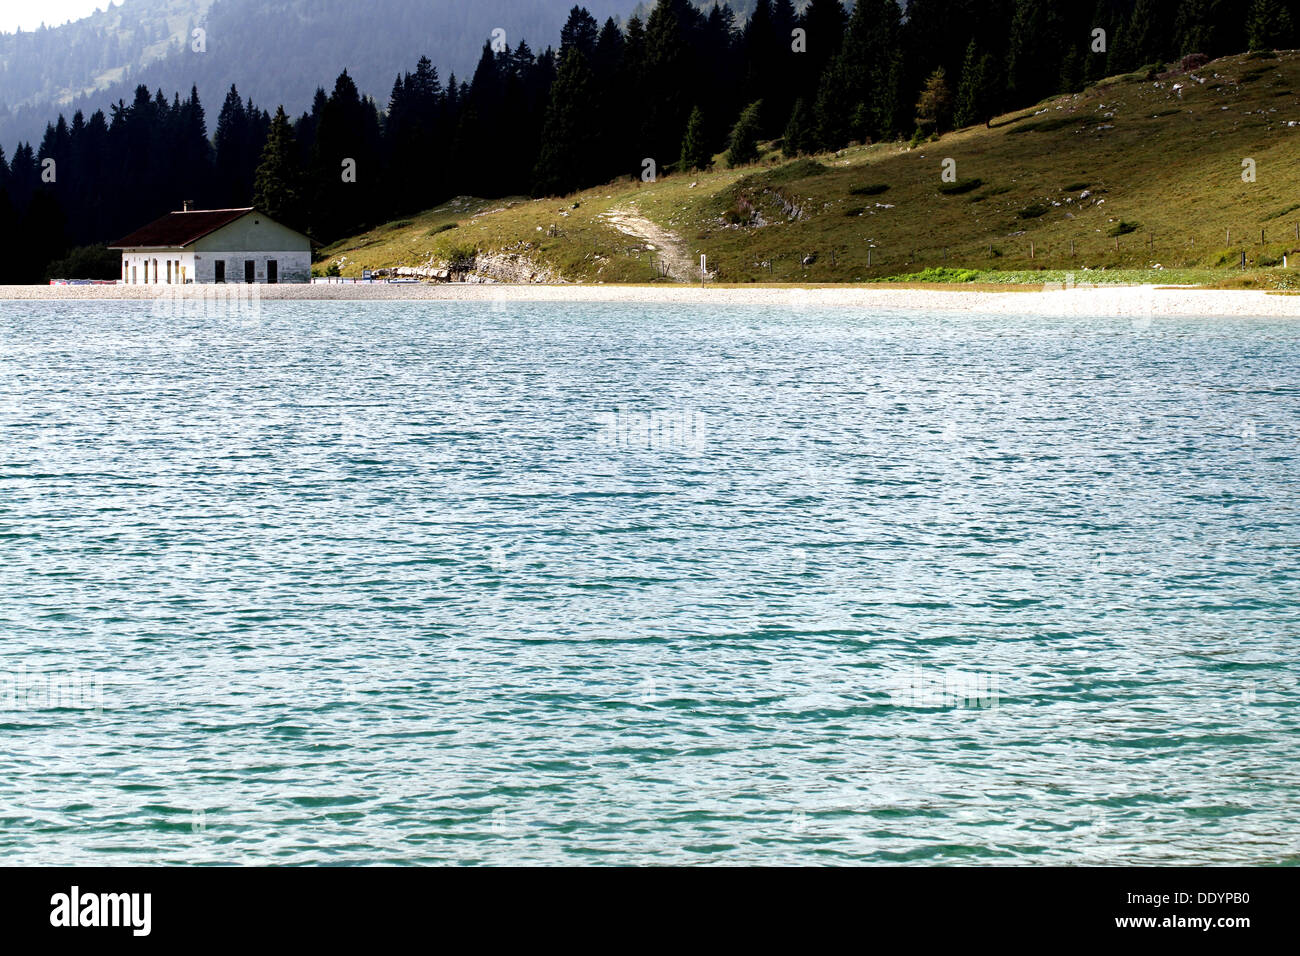 alpine hut on the shore of a beautiful alpine lake surrounded by high mountains in summer Stock Photo